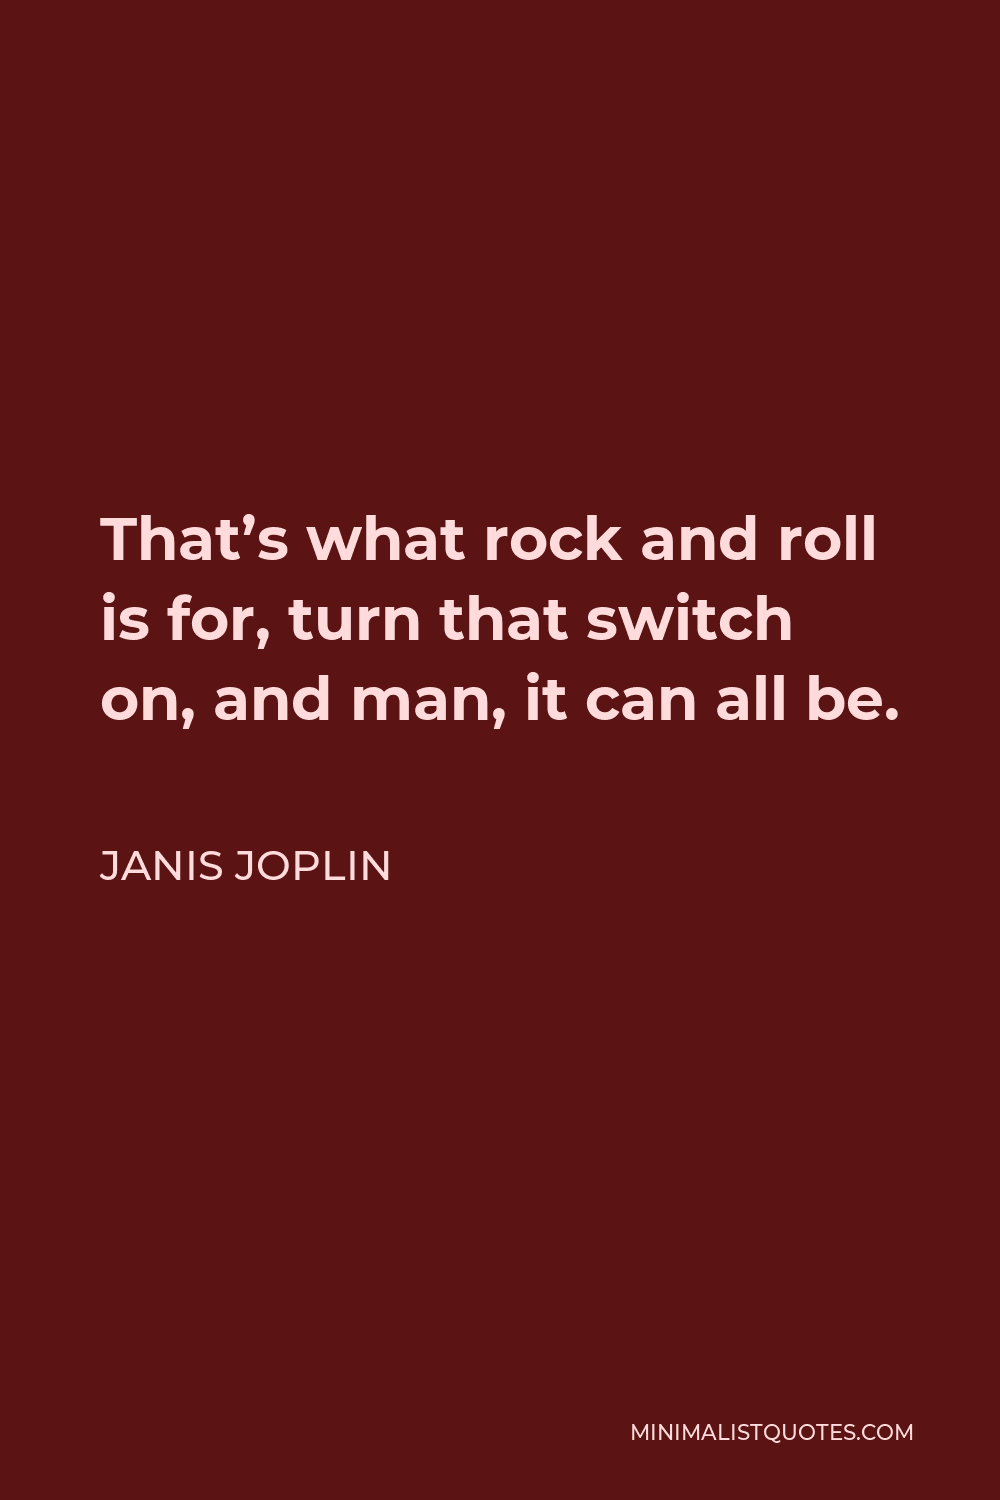 Janis Joplin Quote - That’s what rock and roll is for, turn that switch on, and man, it can all be.